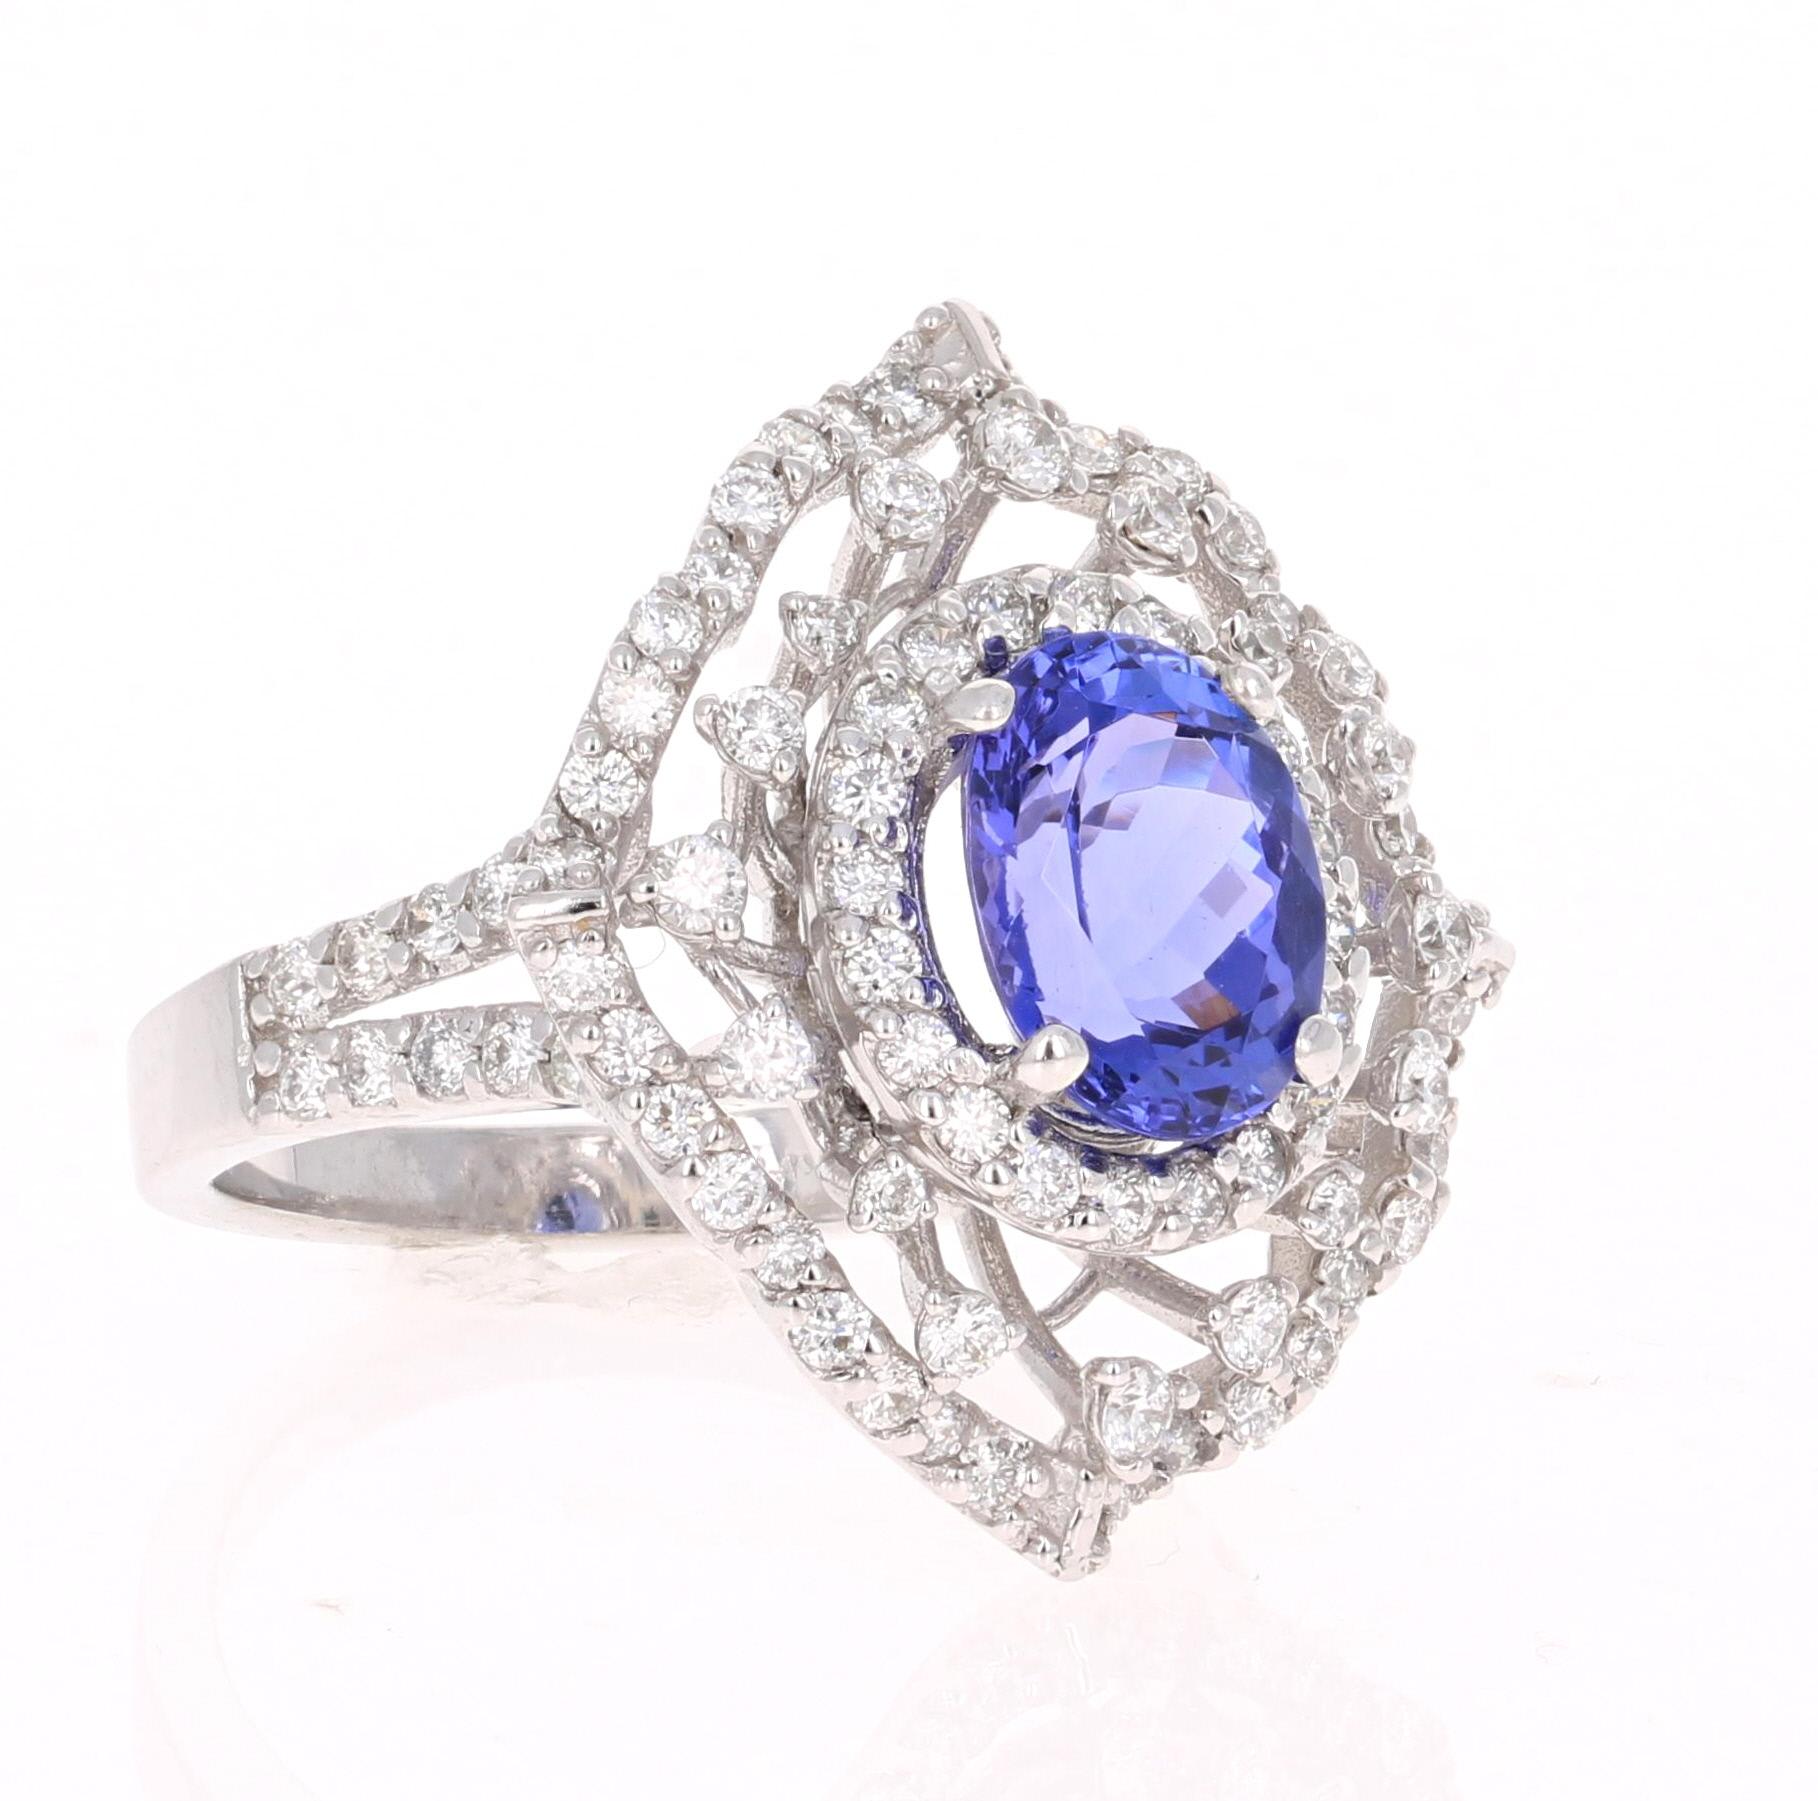 This gorgeous ring has a 2.60 Carat Oval Cut Tanzanite that is set in the center of the ring.  The Tanzanite is surrounded by 92 Round Cut Diamonds that weigh 1.23 carats (Clarity: VS2, Color: F)  The total carat weight of the ring is 3.83 carats. 